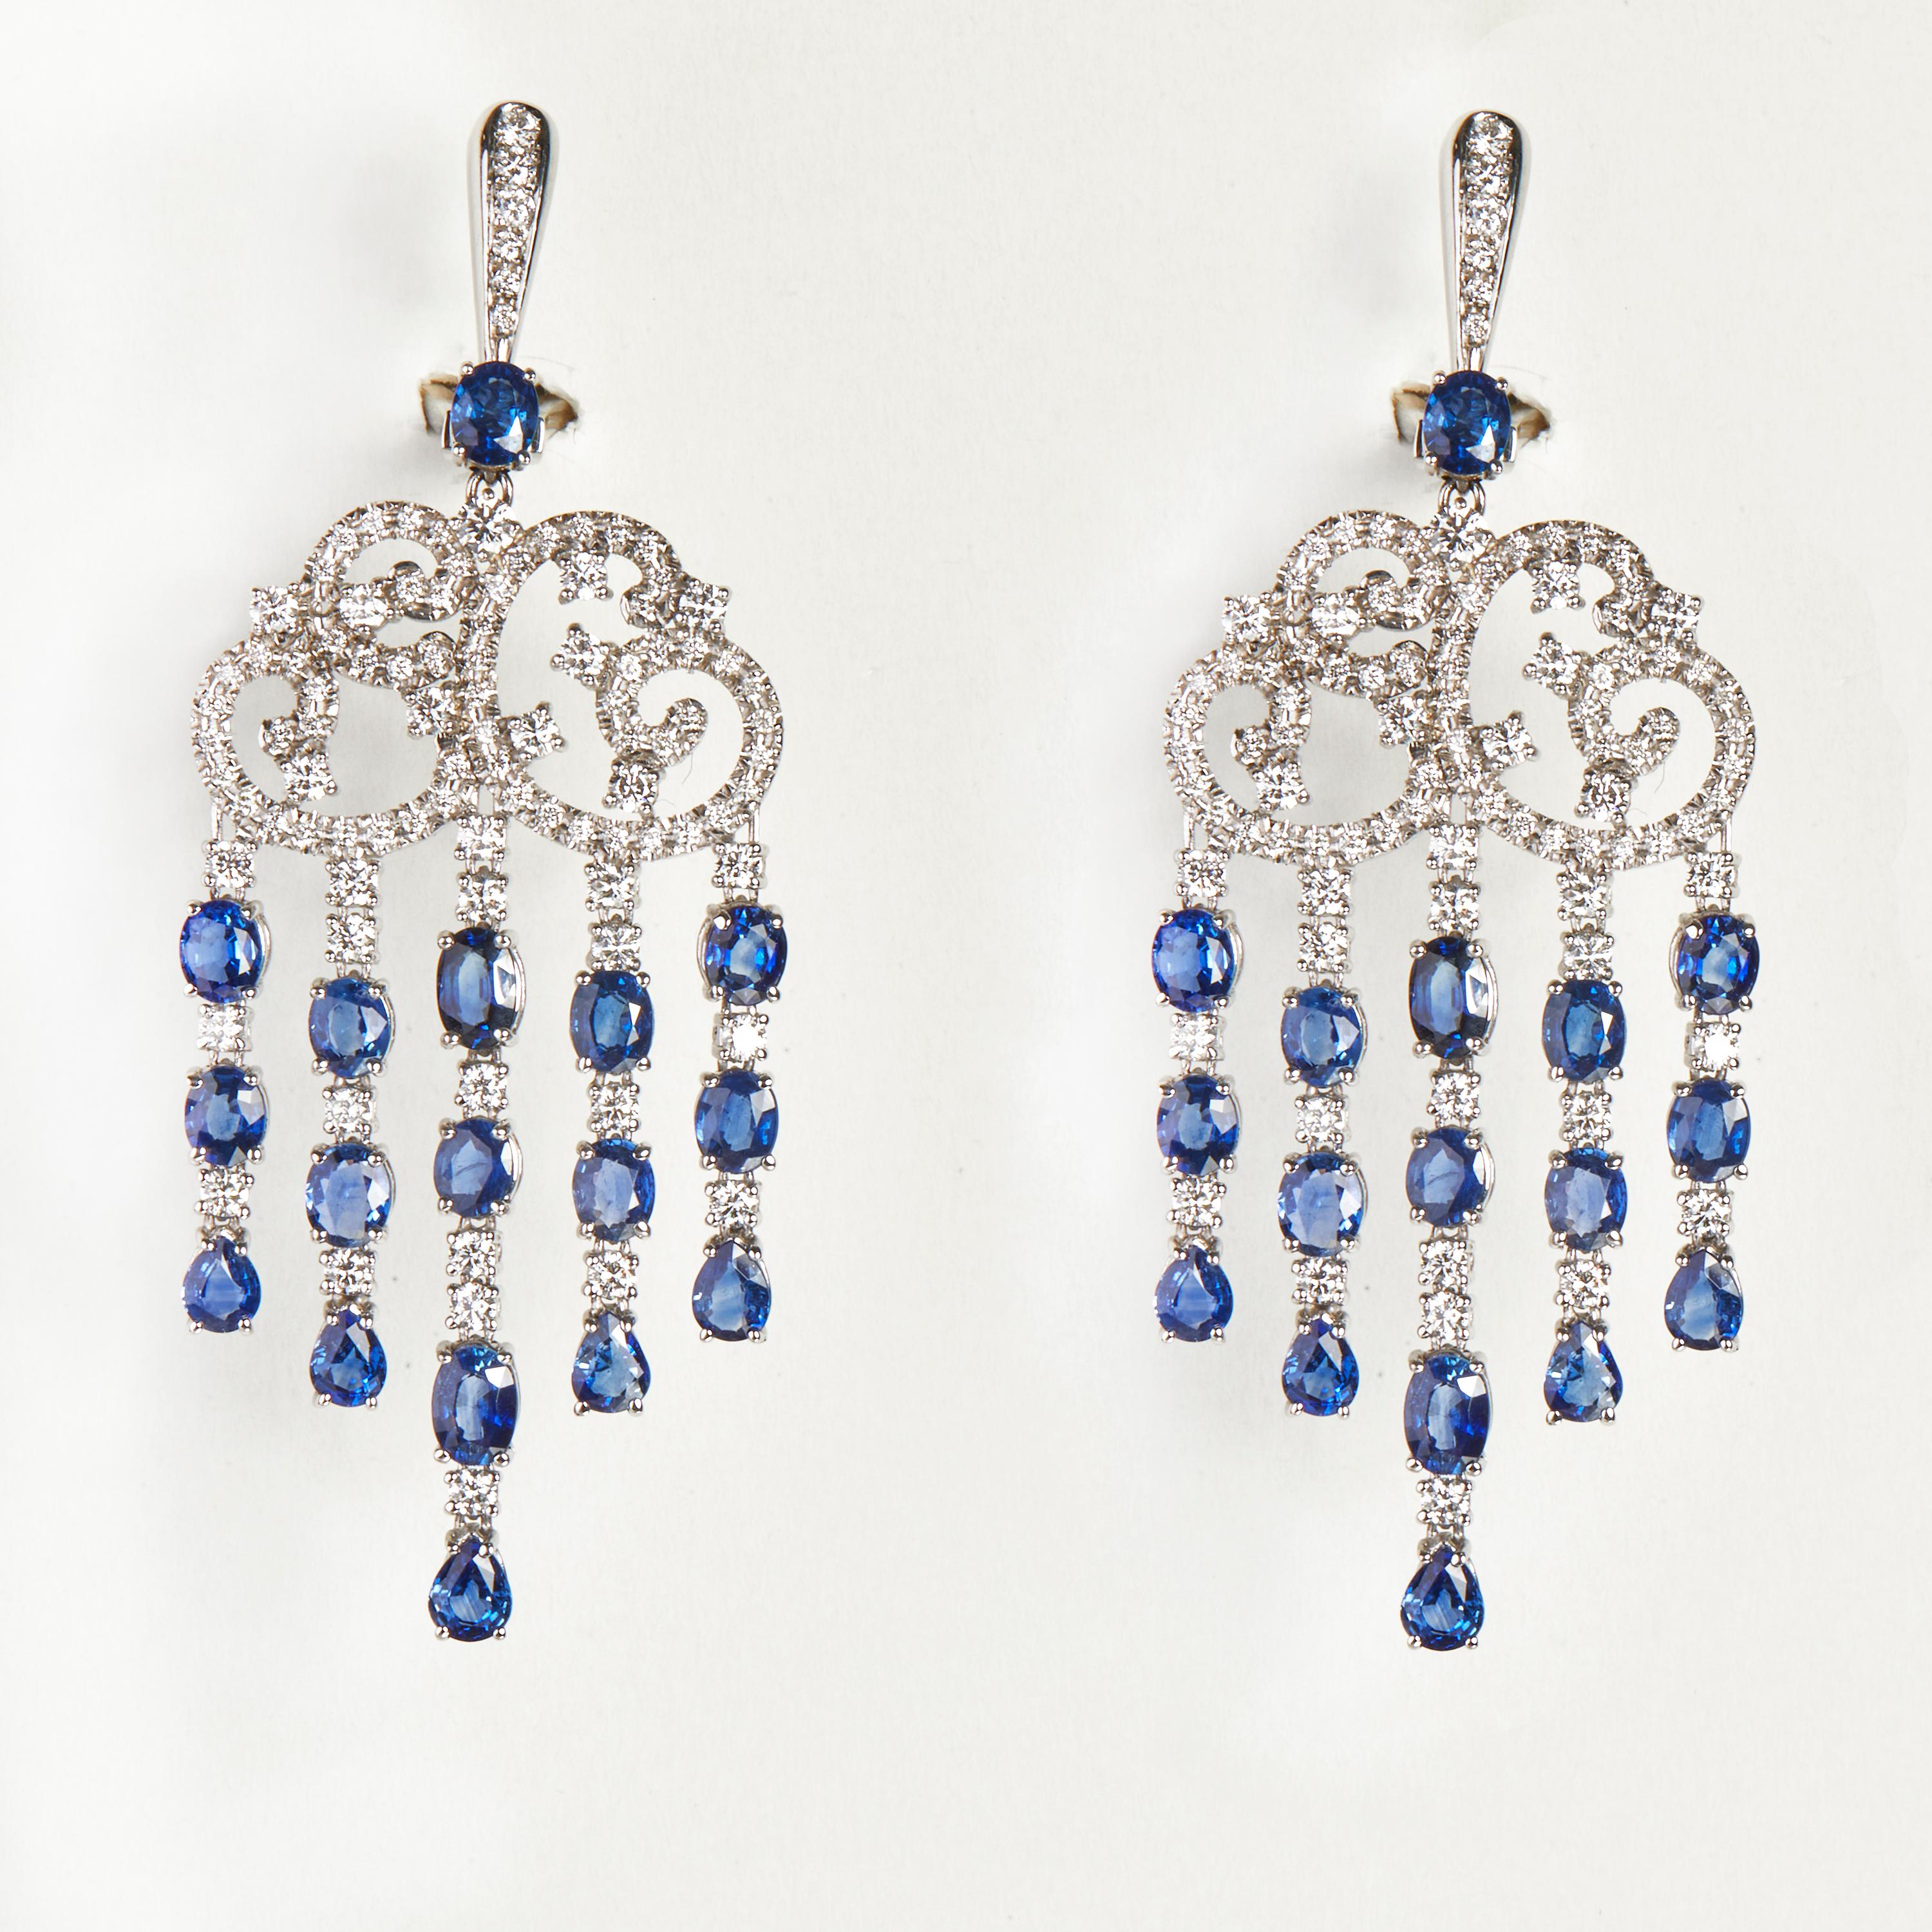 18 Karat White Gold Diamond and Sapphire Dangle Earrings

196  Diamonds 3,81 Carat H SI
34 Sapphires  15.17 Carat


Founded in 1974, Gianni Lazzaro is a family-owned jewelry company based out of Düsseldorf, Germany.
Although rooted in Germany,